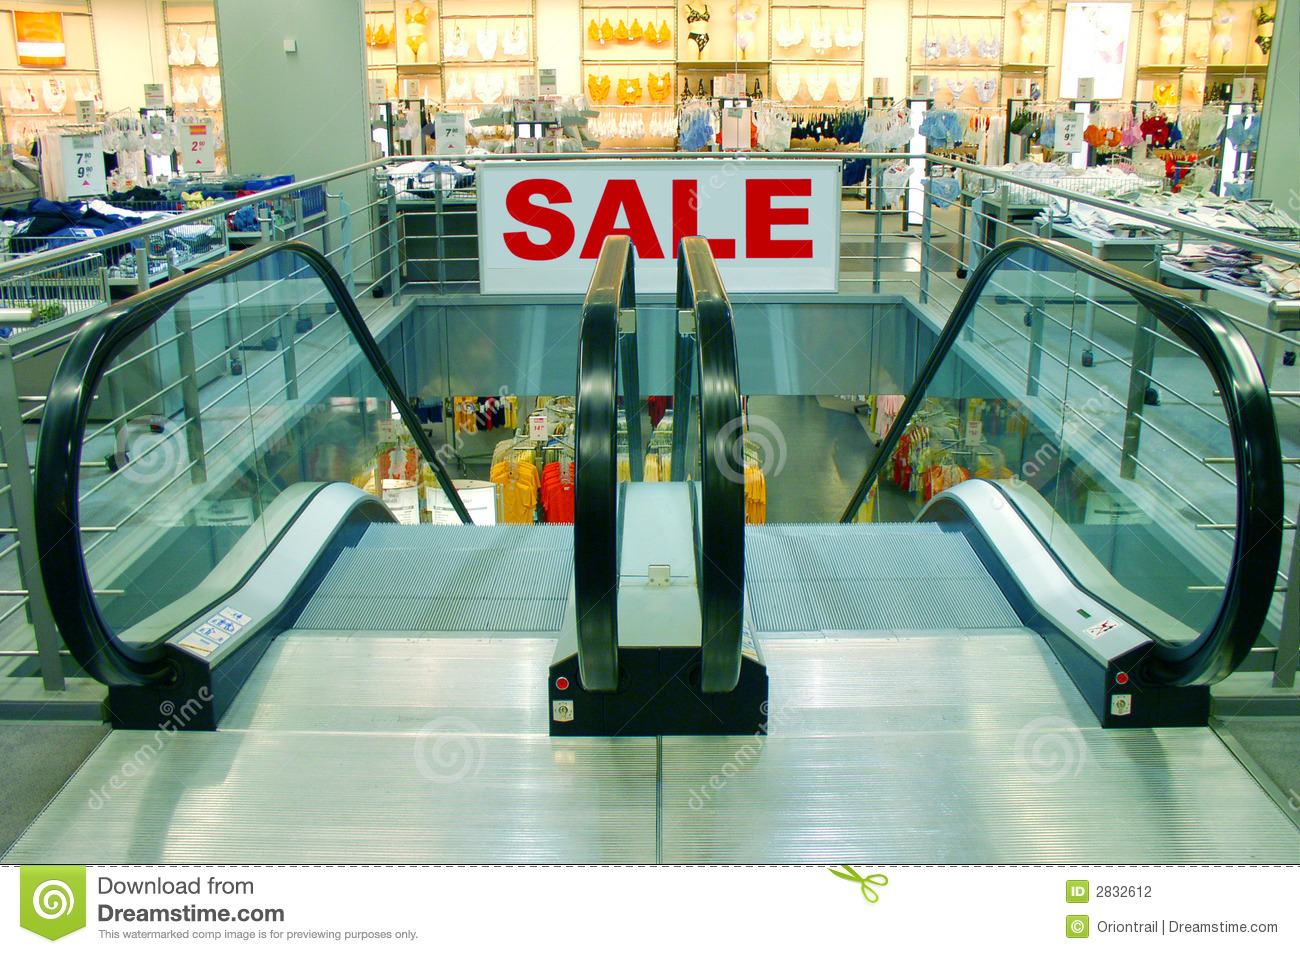 Escalators In A Shopping Mall In Which There Is A Big  Sale  Sign